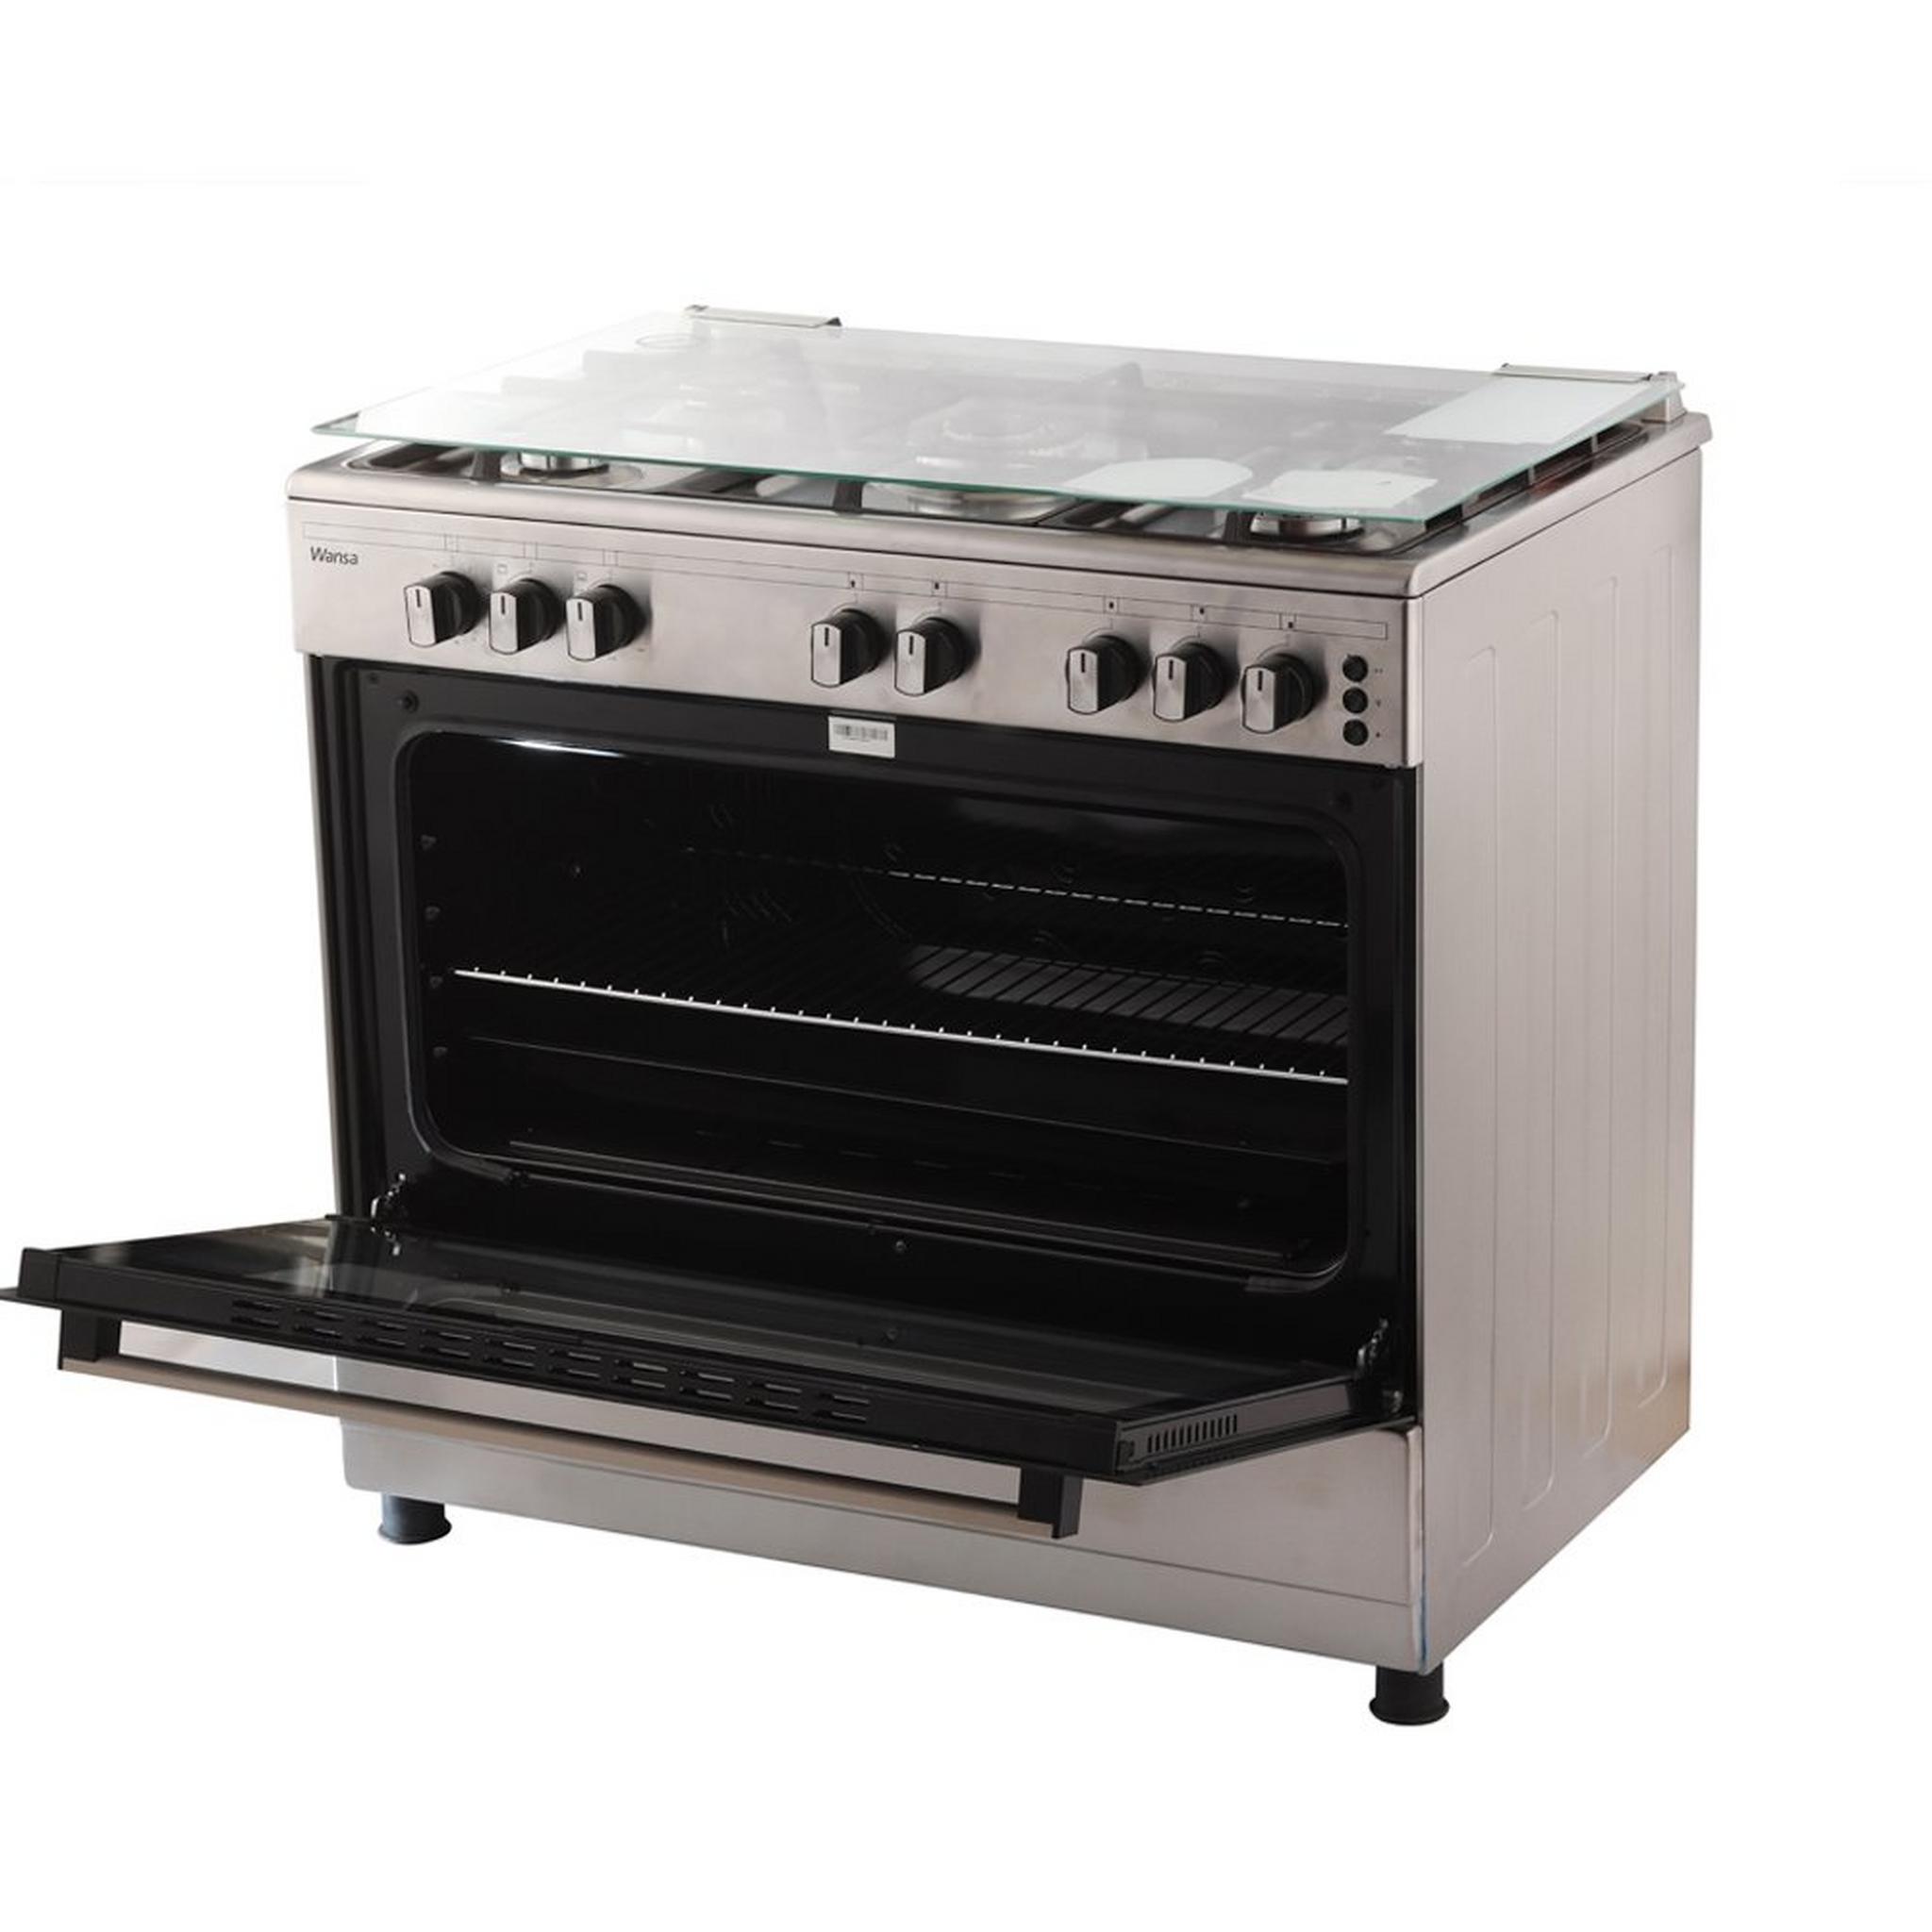 Wansa 90x60cm 5 Burners Free Standing Gas Cooker (WCT9502124X) – Stainless Steel